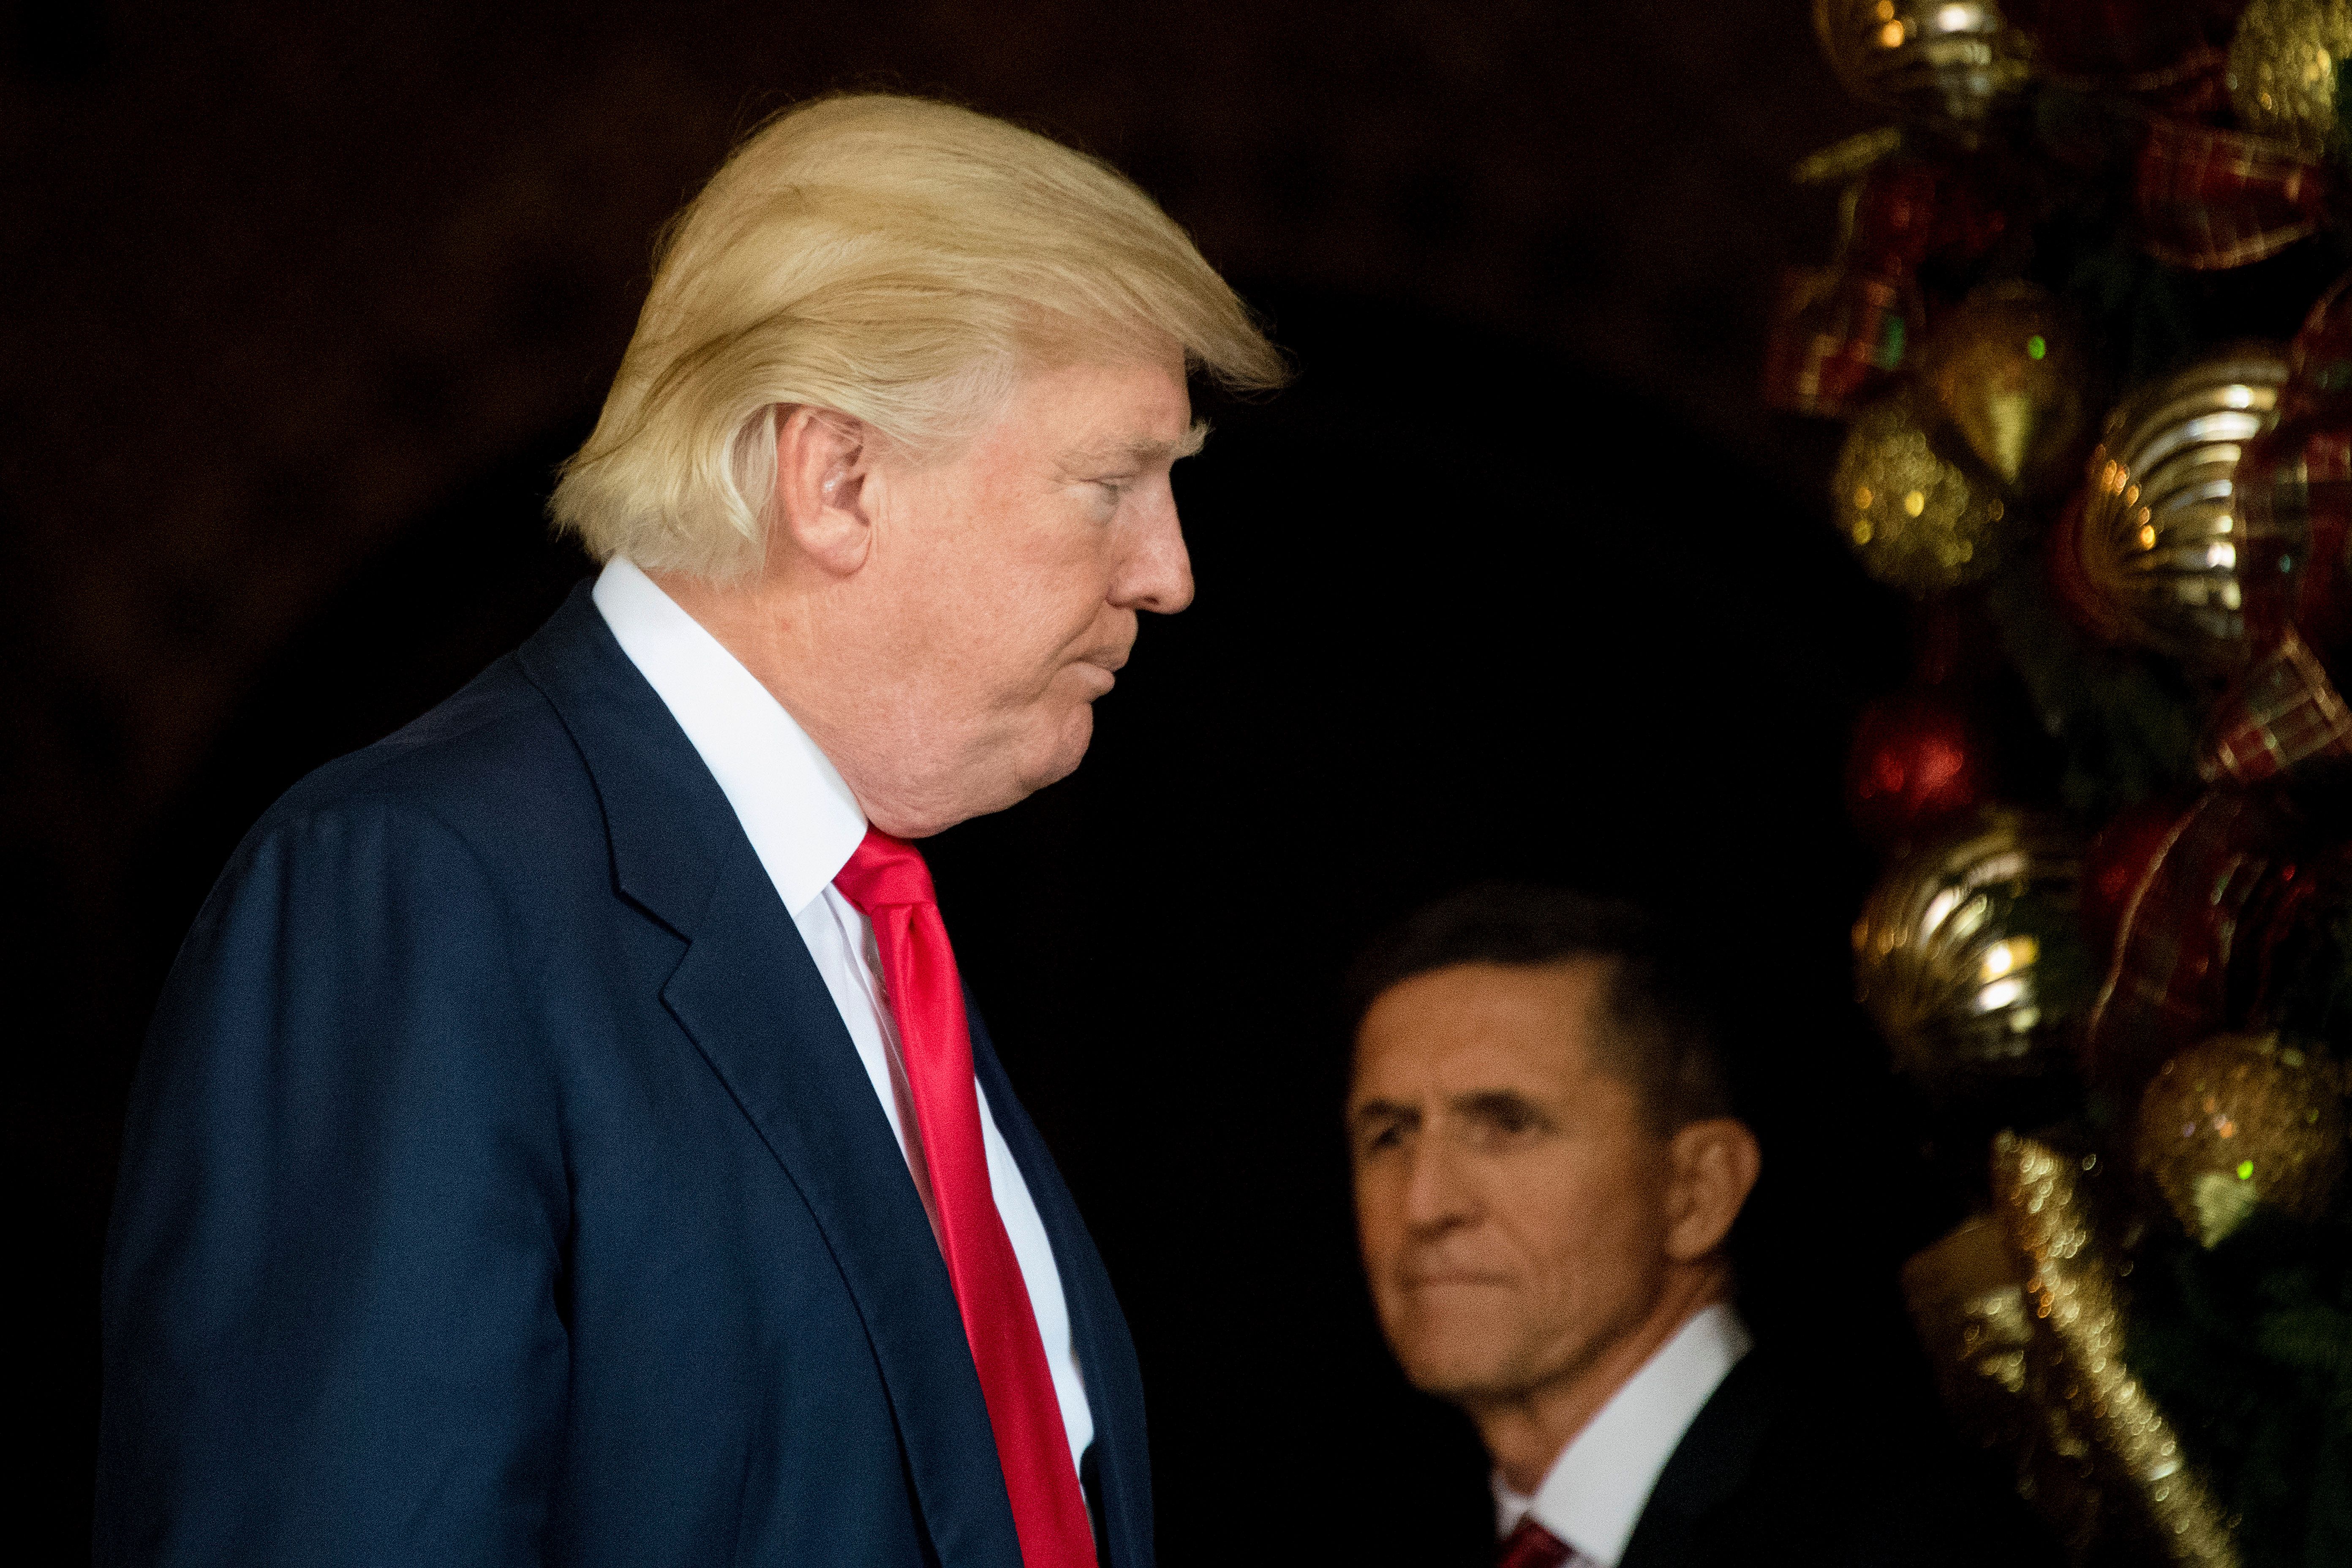 US President-elect Donald Trump (L) stands with Trump National Security Adviser Lt. General Michael Flynn (R) at Mar-a-Lago in Palm Beach, Florida, where he is holding meetings on December 21, 2016. (JIM WATSON/AFP via Getty Images)